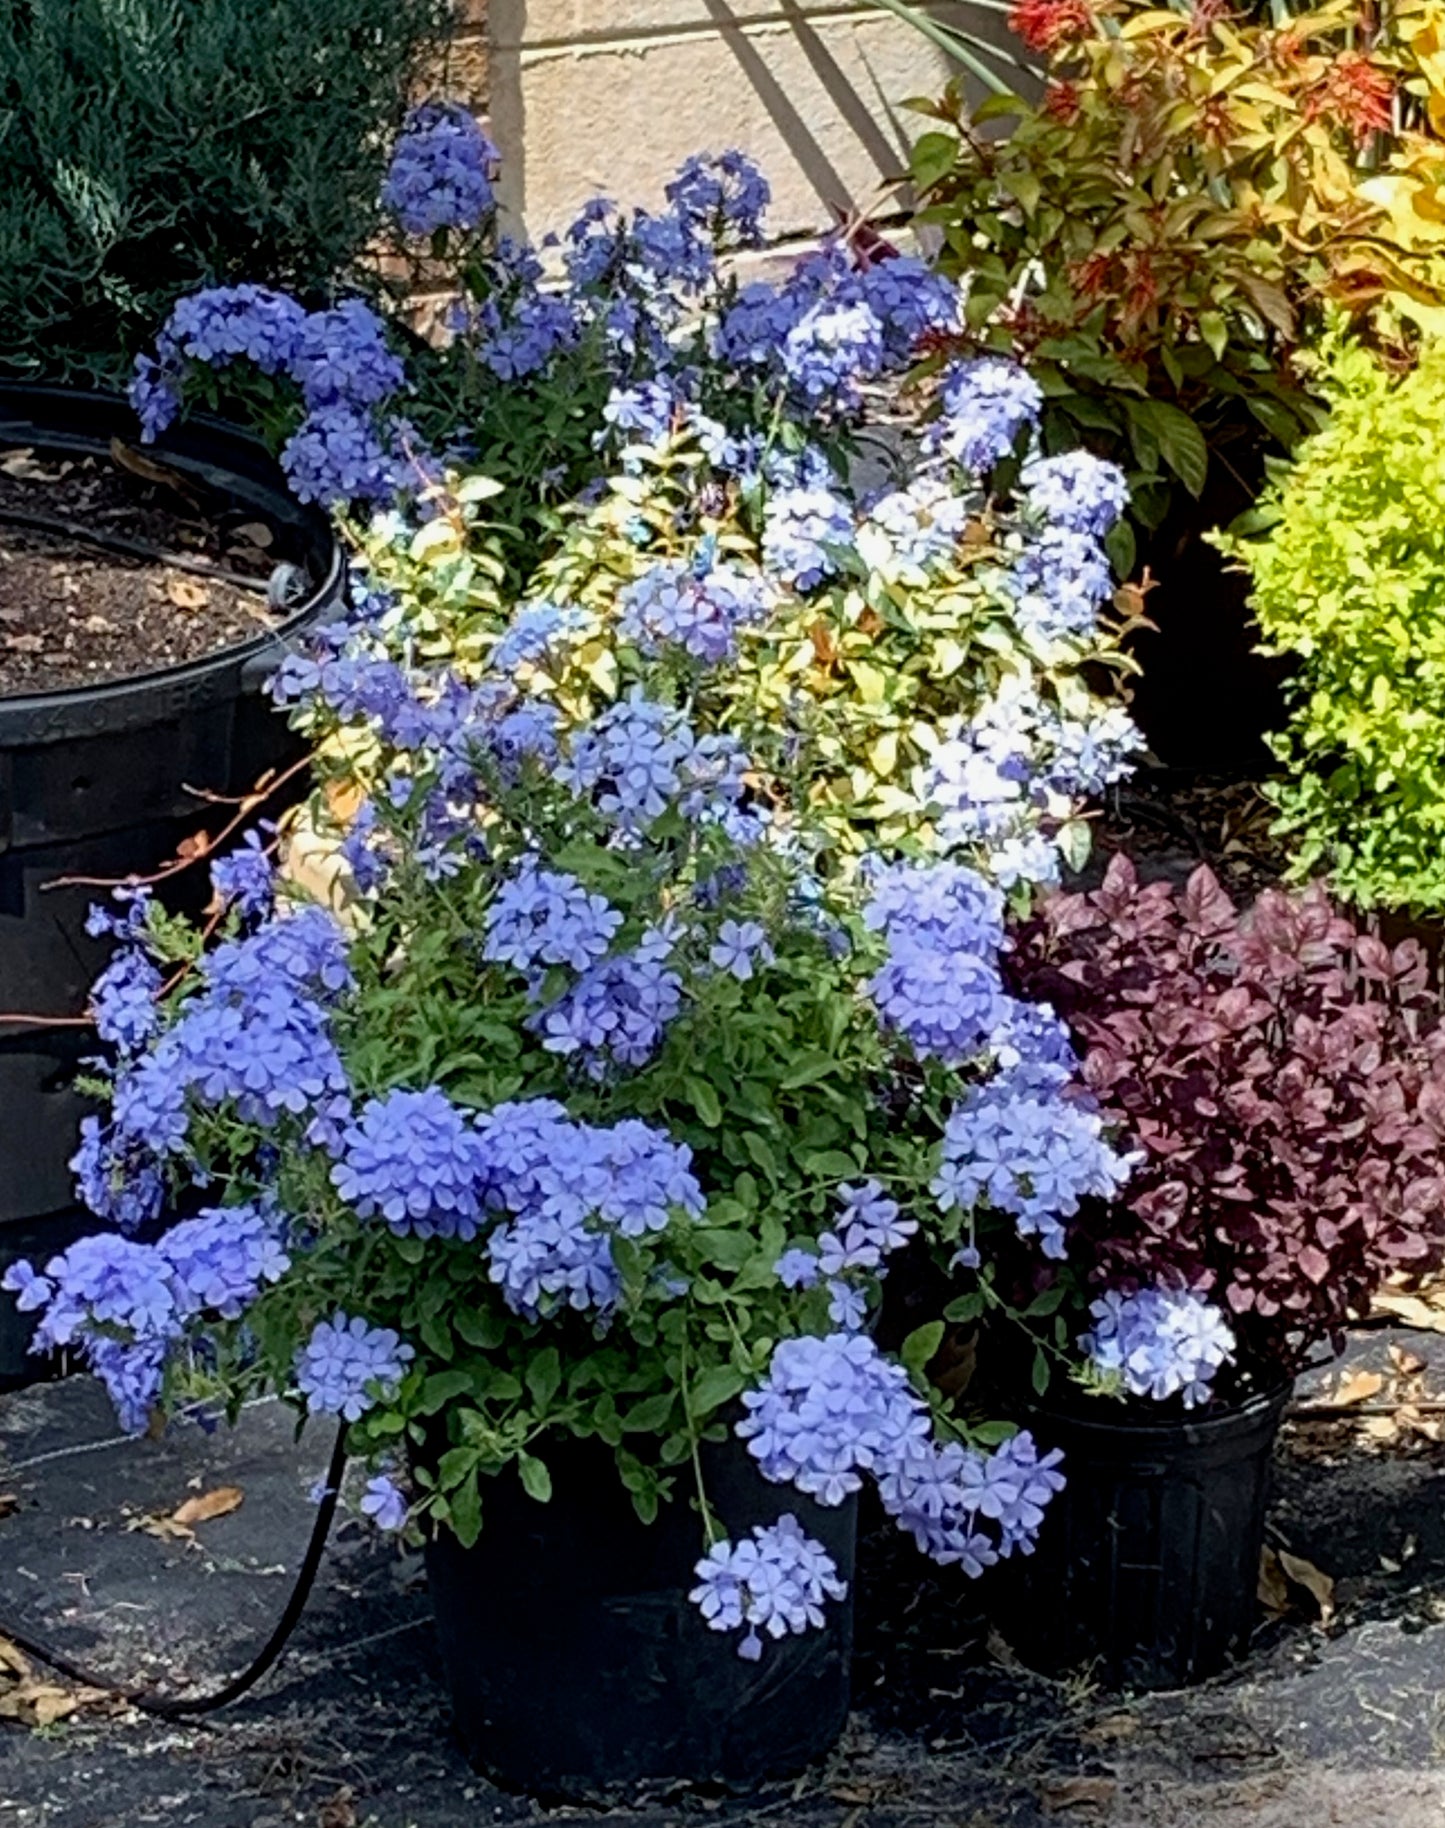 Plumbago Shrub (Blue Flowers) in a 10 in. (3 Gal.) Grower Pot